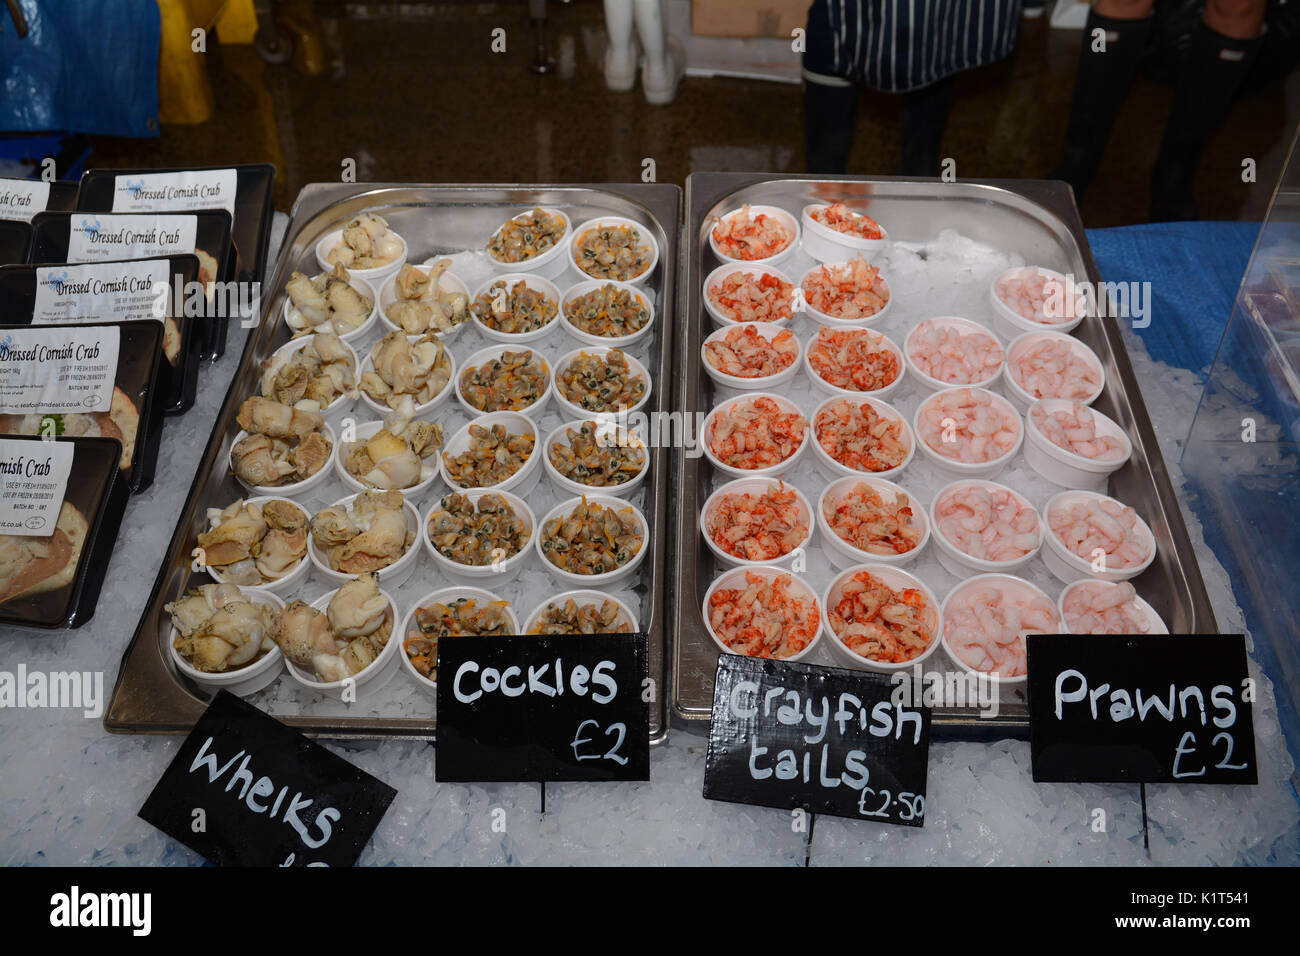 Newlyn Harbour, Cornwall, UK. 28th August 2017. Every bank holiday Newlyn harbour in transformed into a showcase for local produce, with fresh fish, cooking demonstrations and food staffls. Credit: Simon Maycock/Alamy Live News Stock Photo